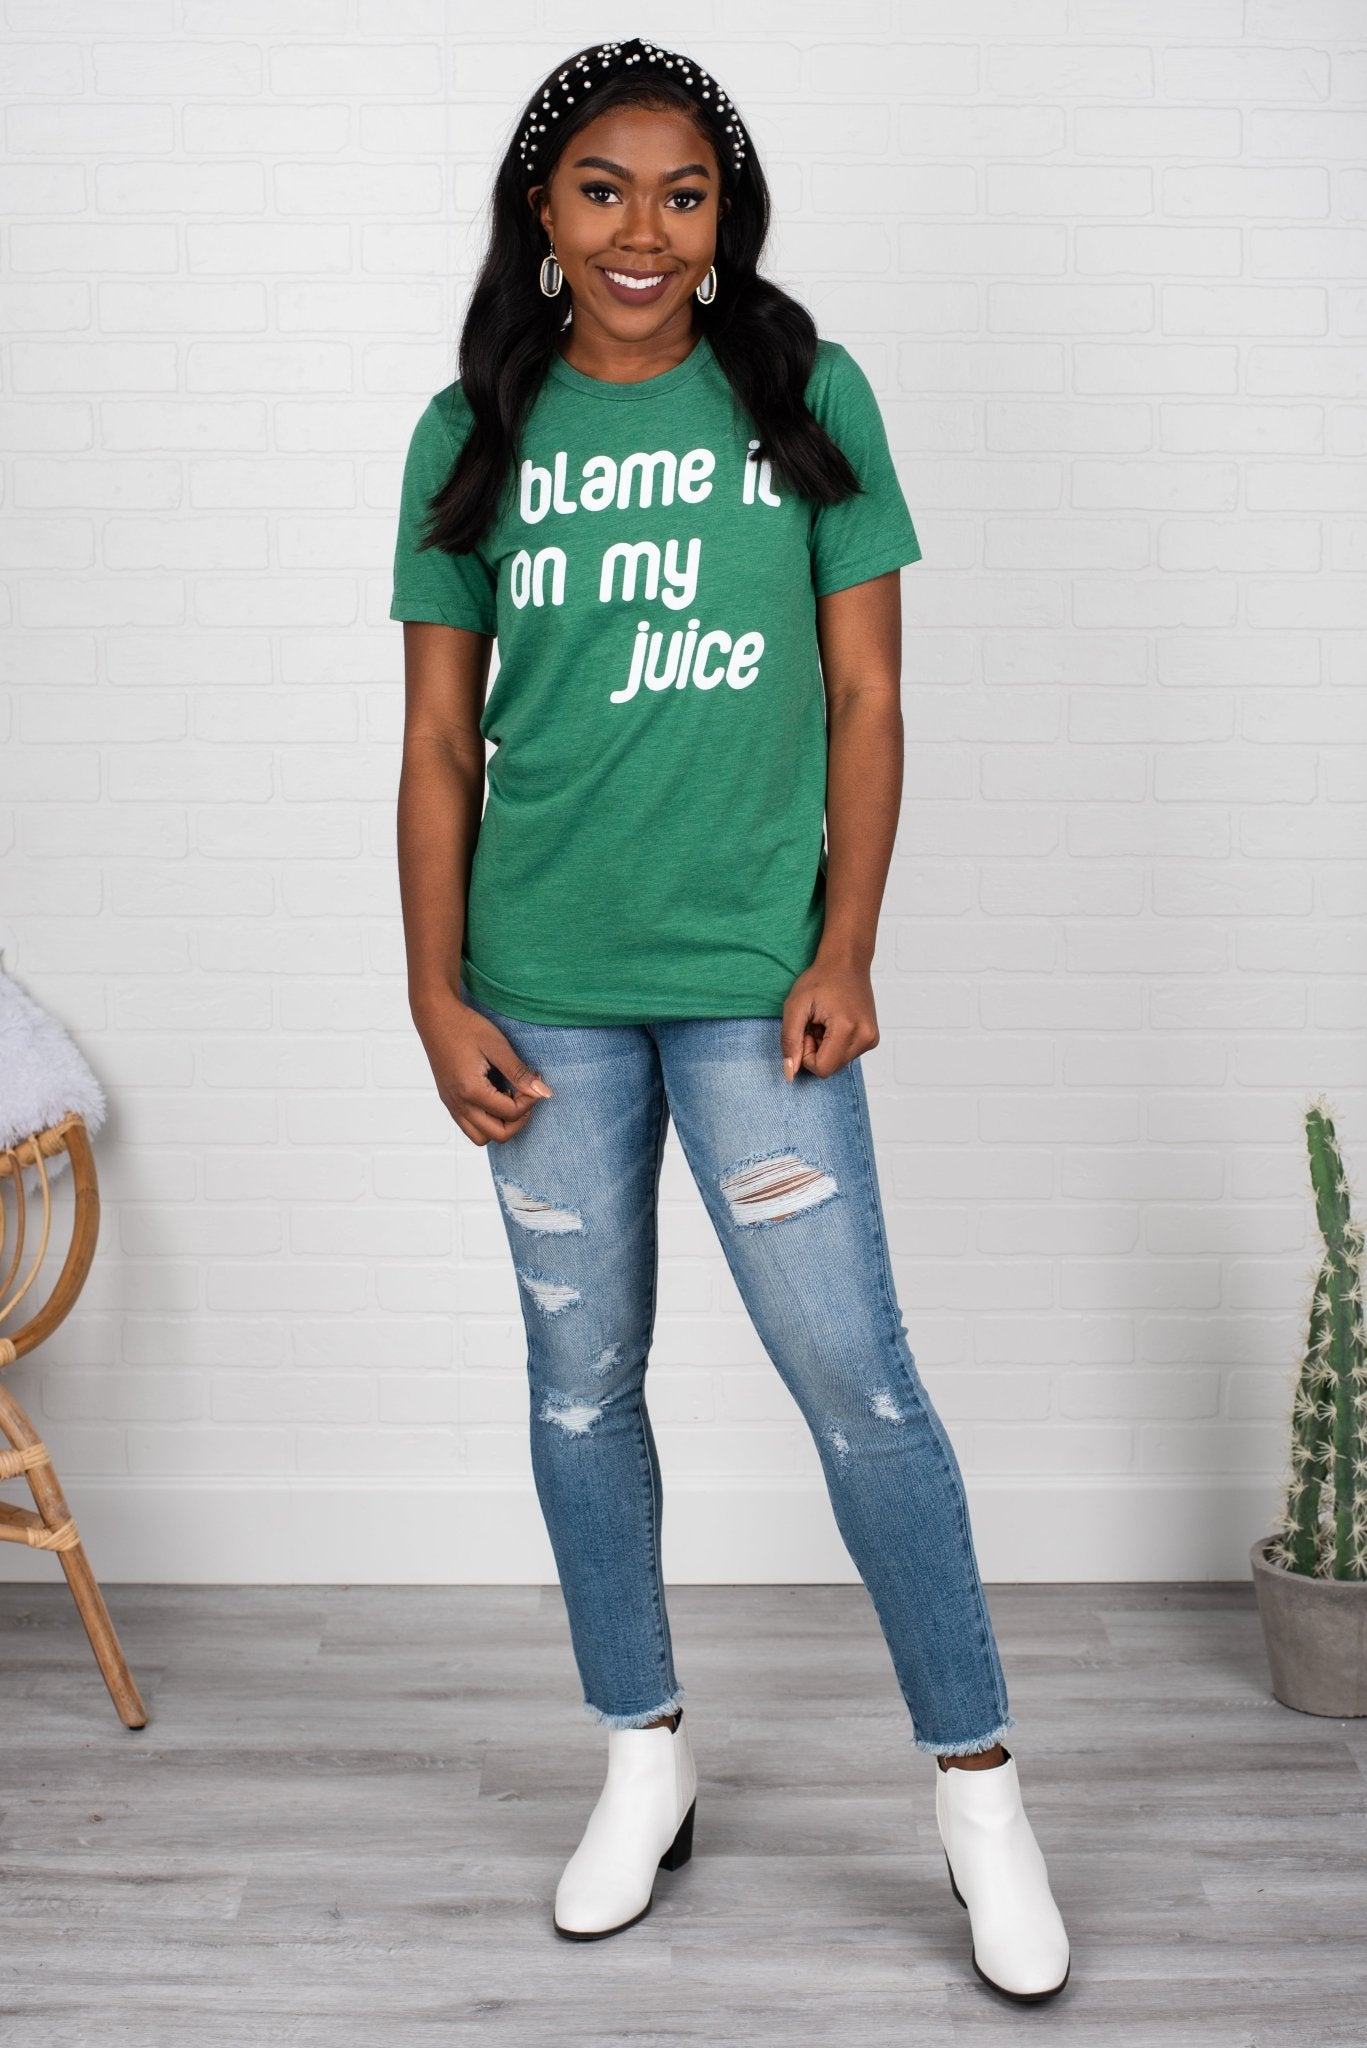 Blame it on my juice unisex short sleeve t-shirt green - Trendy T-shirts - Cute Graphic Tee Fashion at Lush Fashion Lounge Boutique in Oklahoma